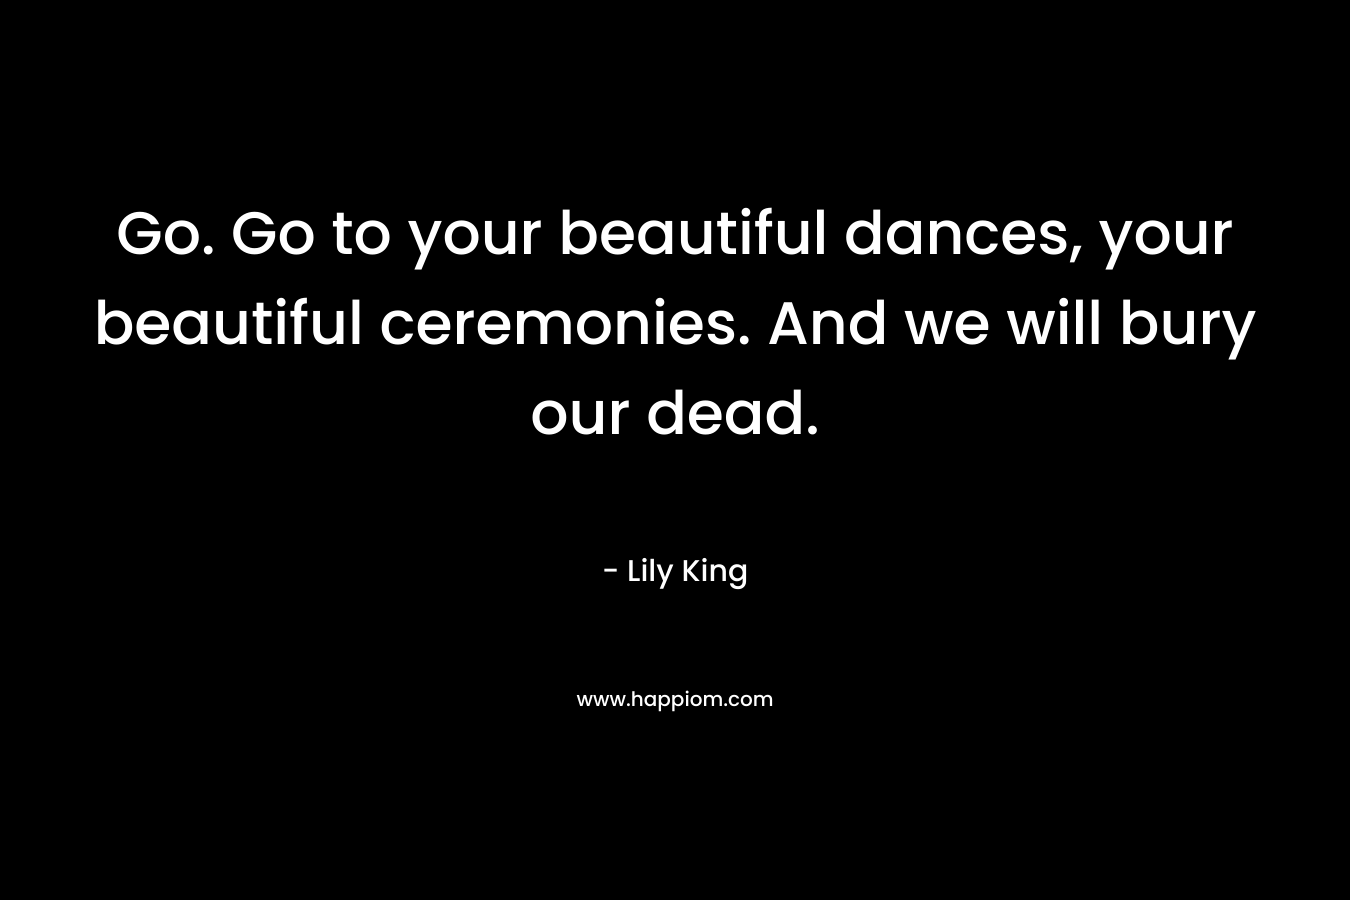 Go. Go to your beautiful dances, your beautiful ceremonies. And we will bury our dead.